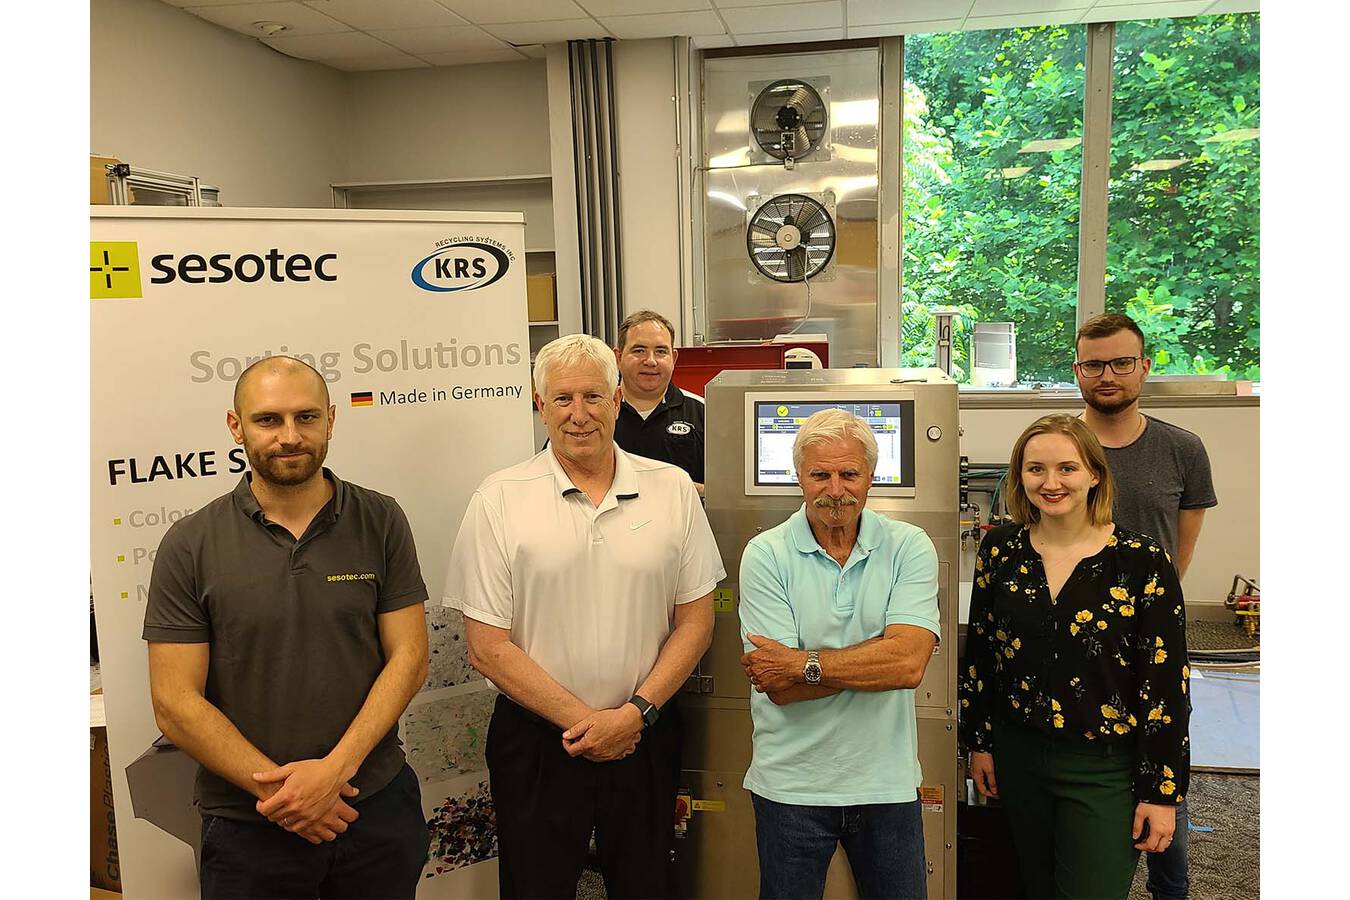 Sesotec Flake Scan system to support plastics industry Sesotec has provided the Polymers Center of Excellence with a a Flake Scan material analysis system, to help optimize products and processes. in the plastics industry.